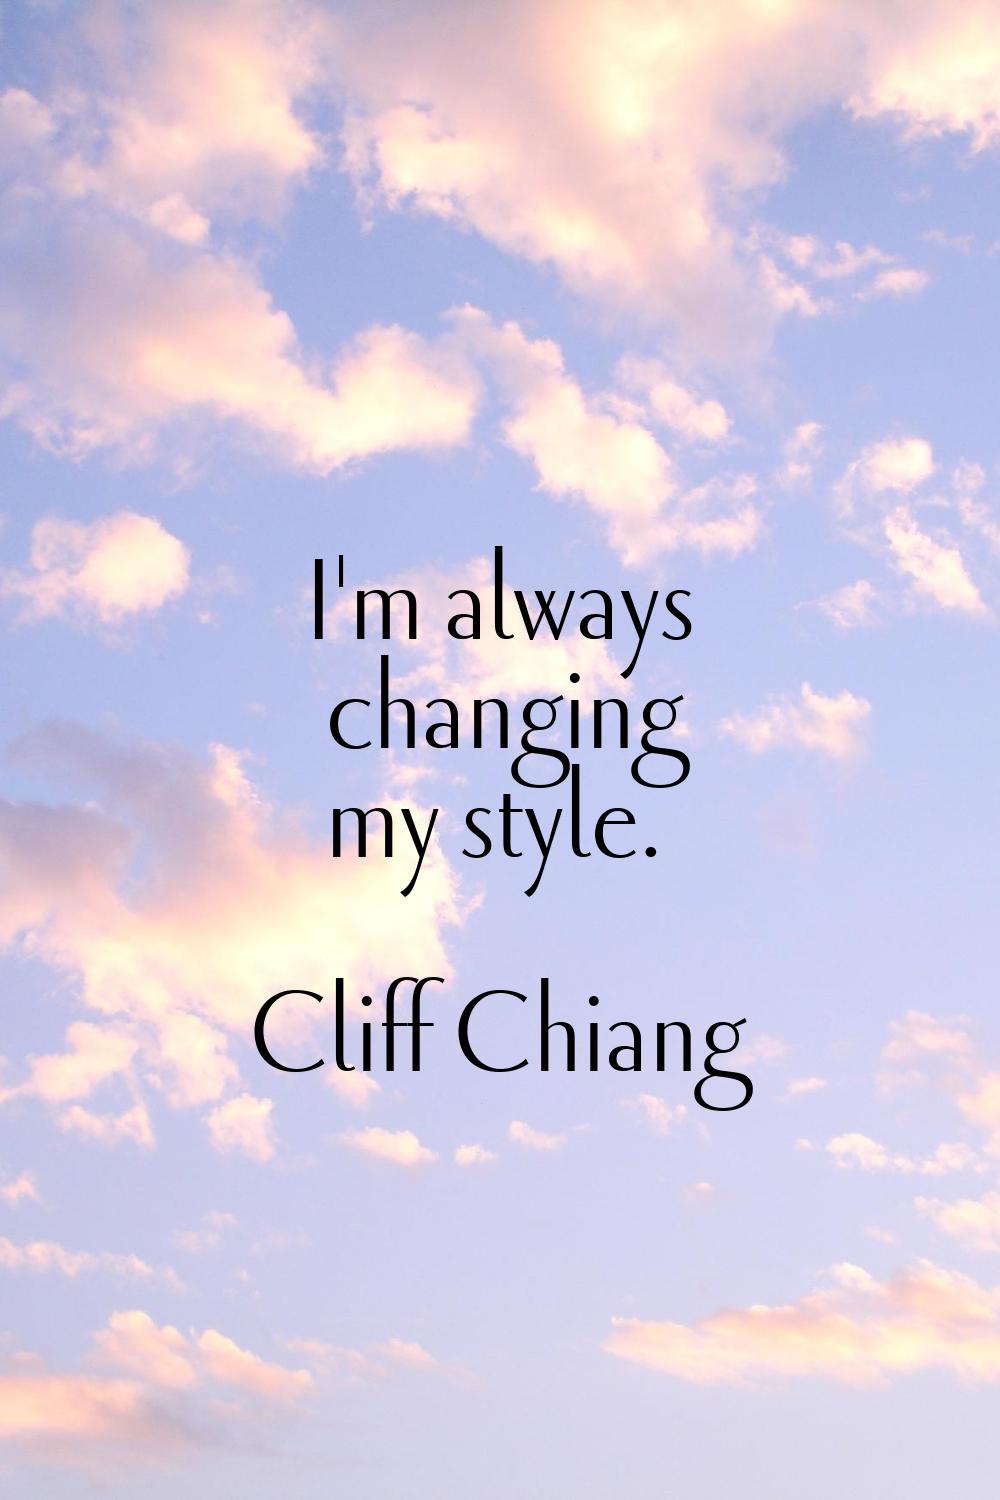 I'm always changing my style.